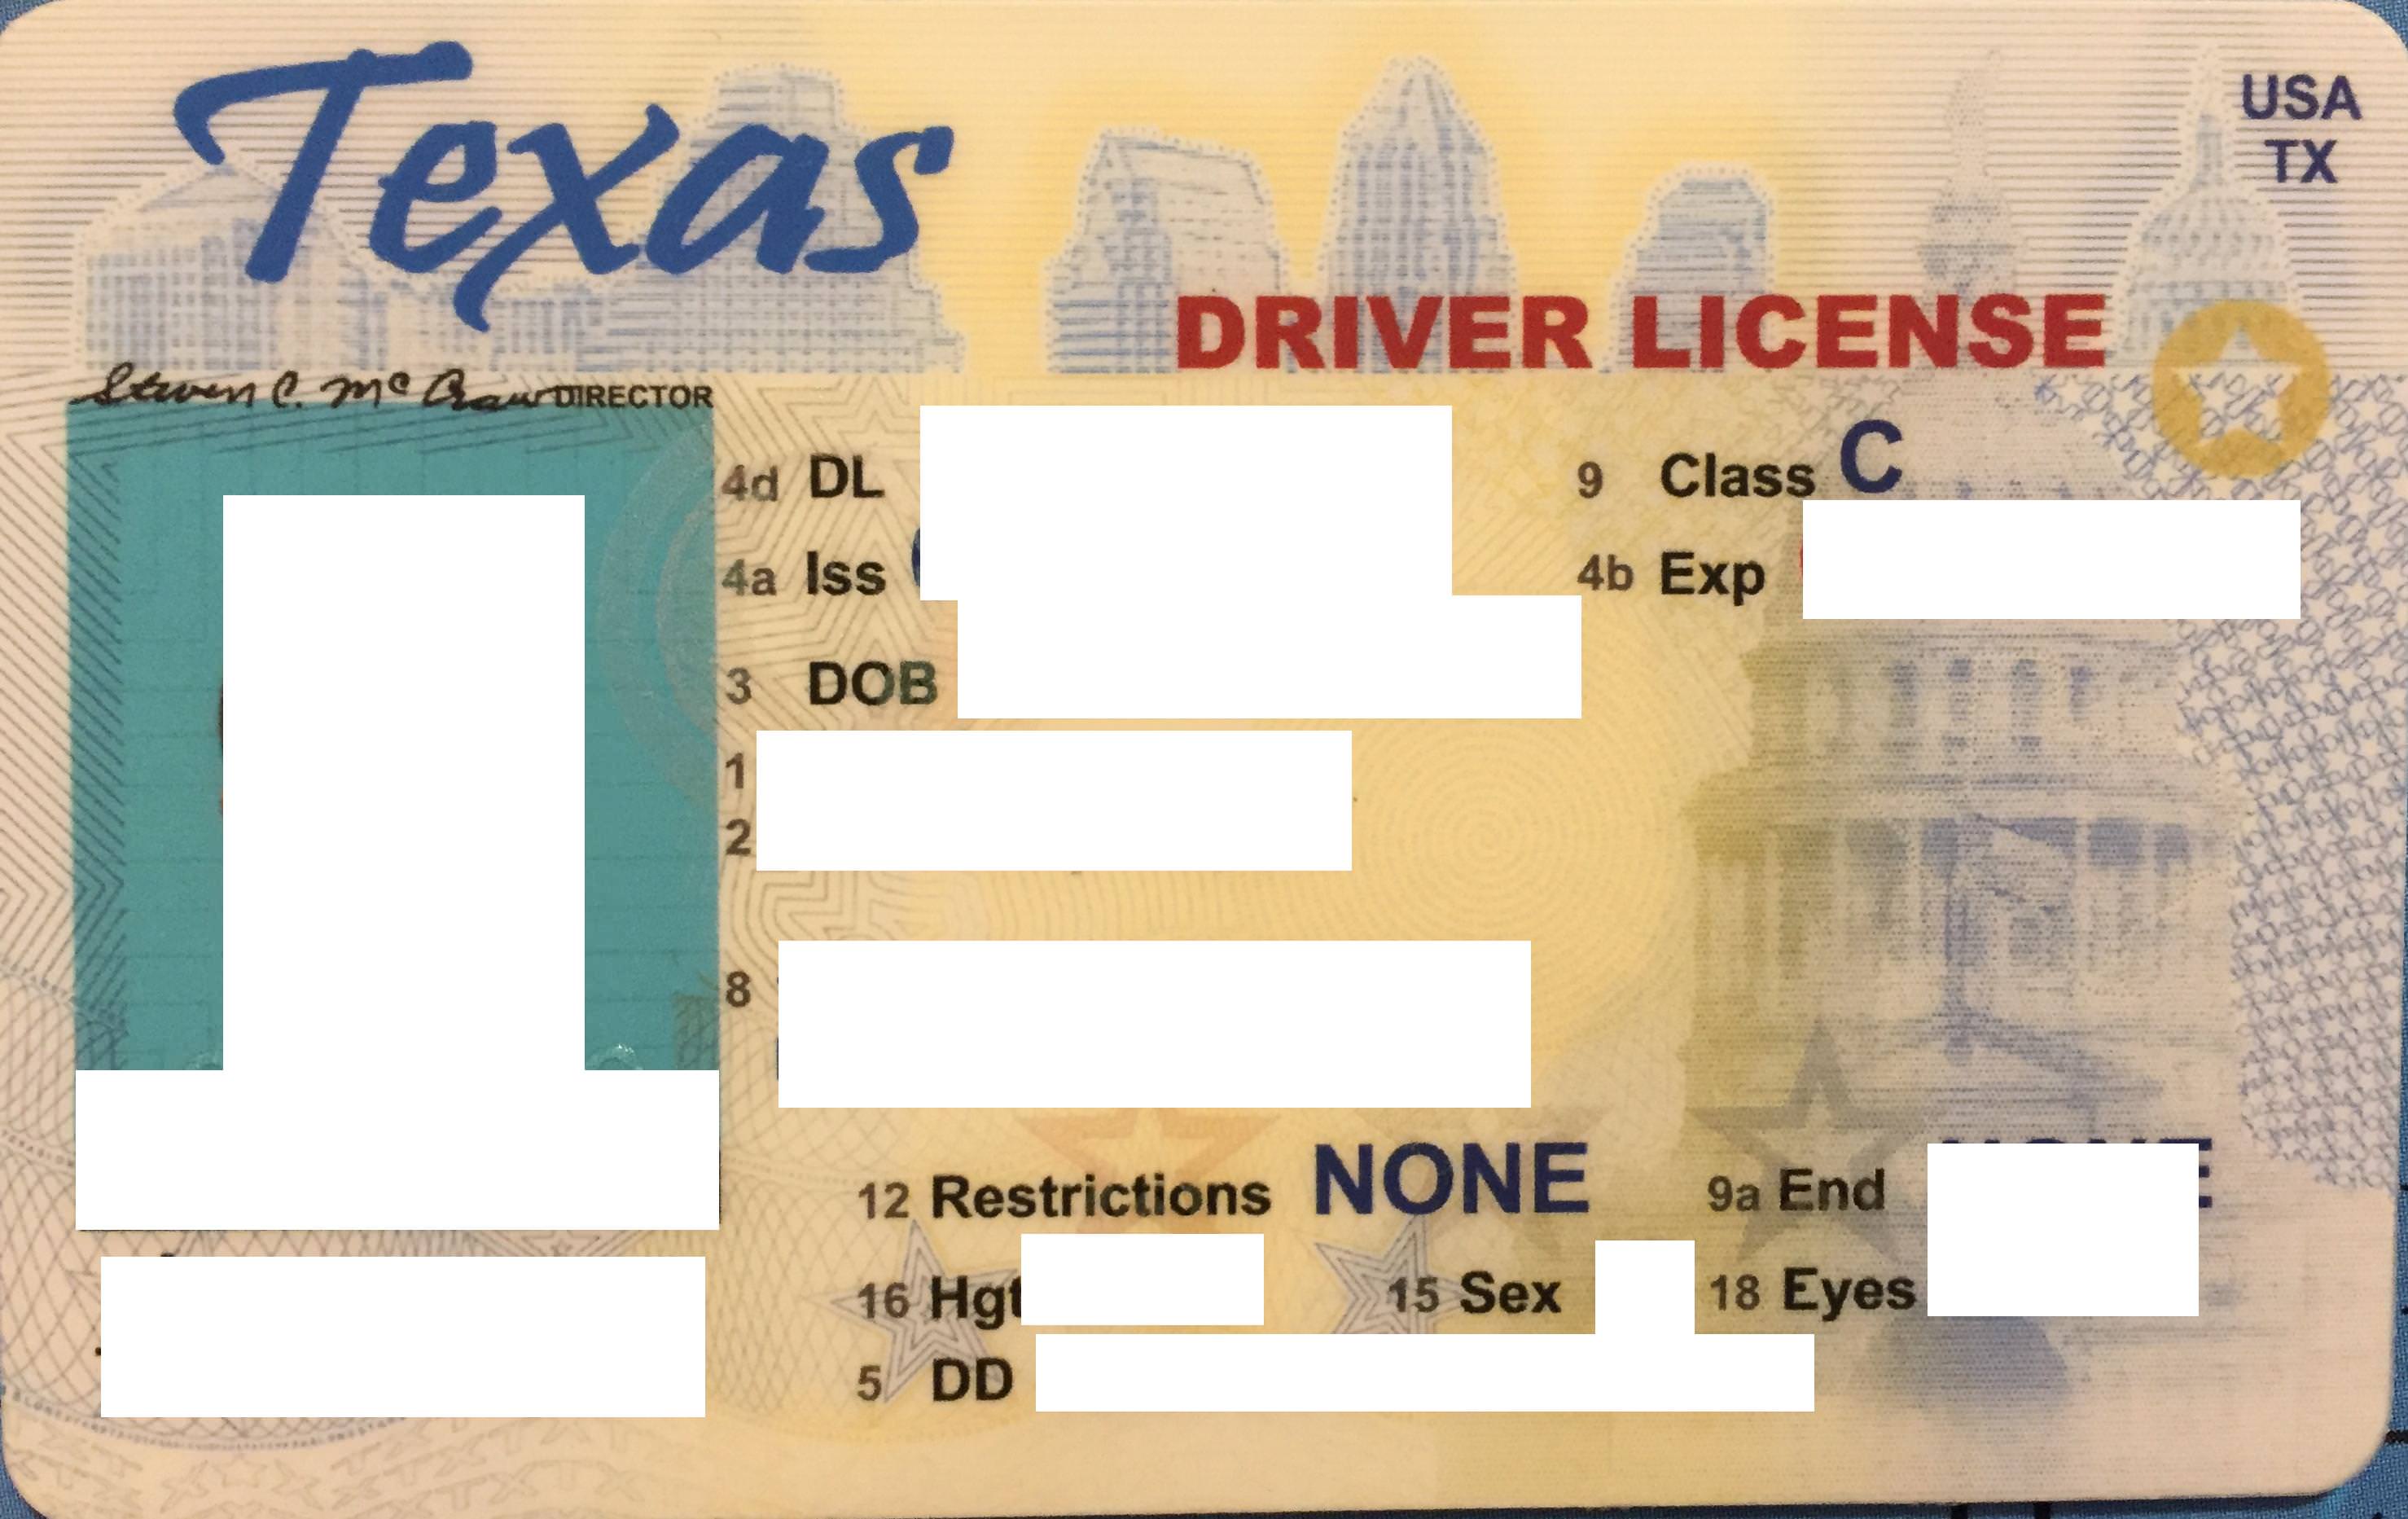 Texas Fake ID 😇 Best Scannable Fake IDs from IDGod